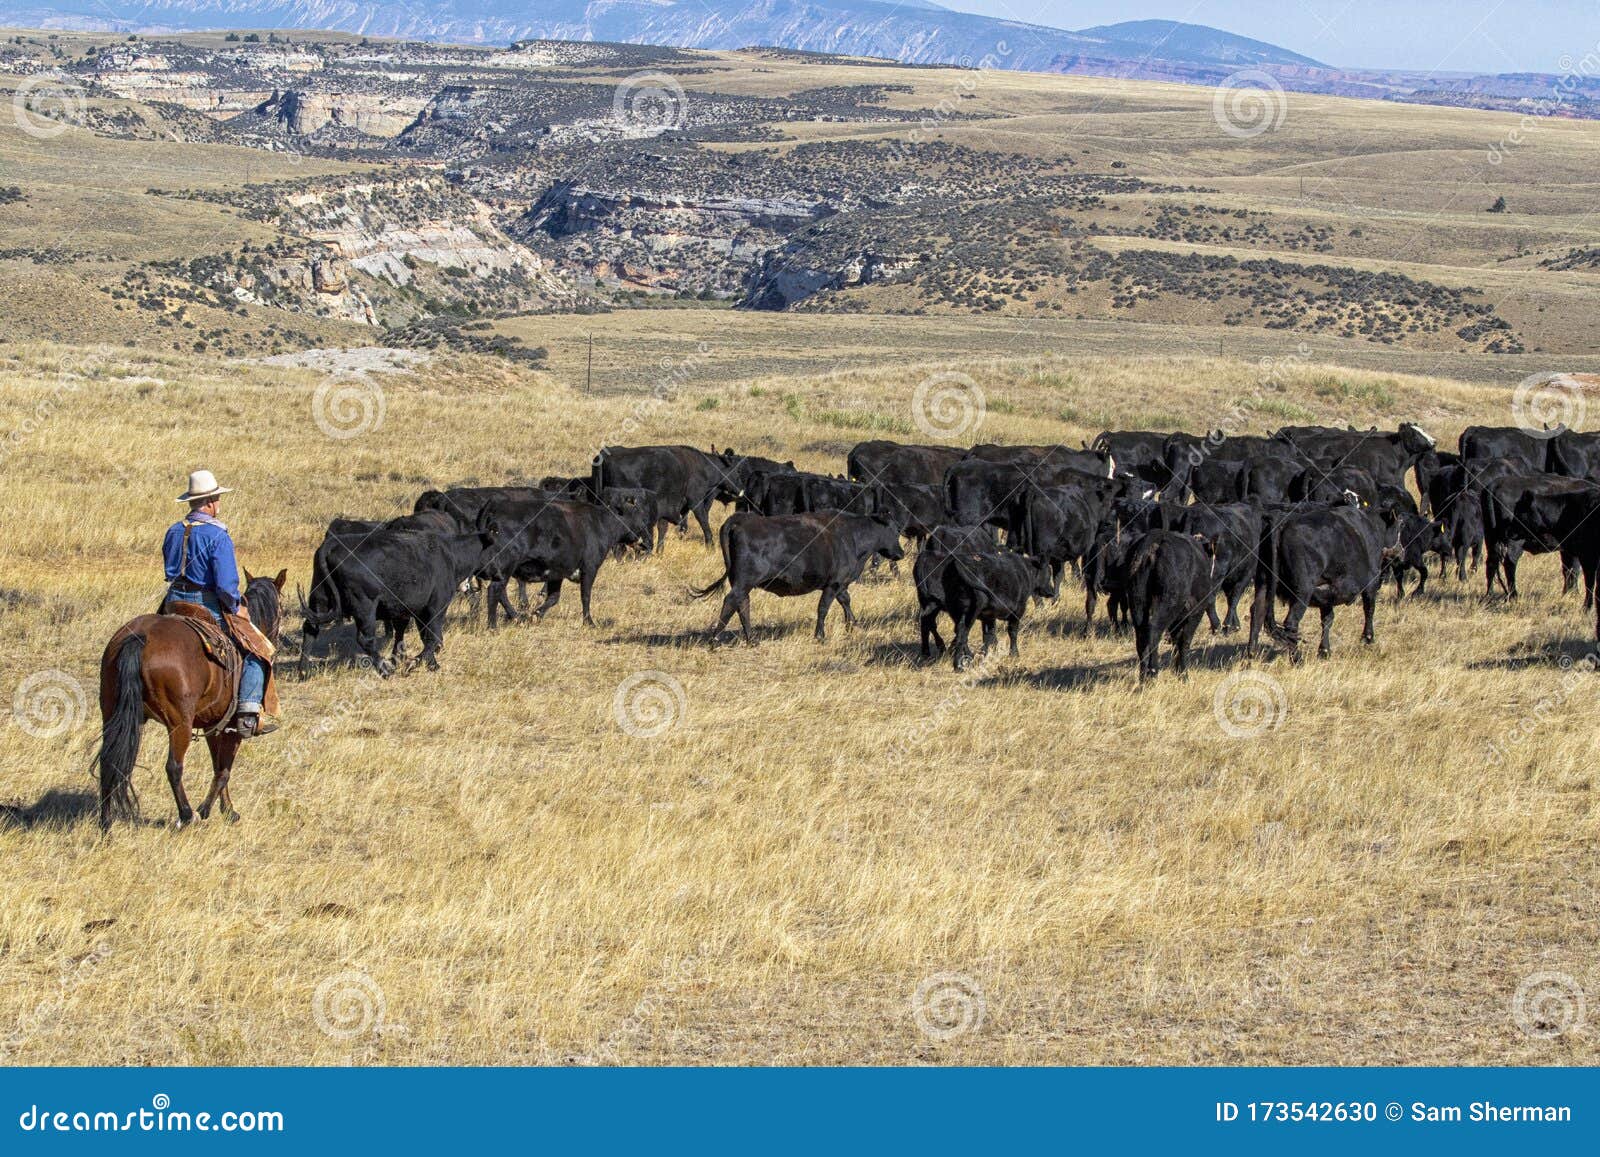 cattle drive near the hole-in-the-wall country of wyoming.